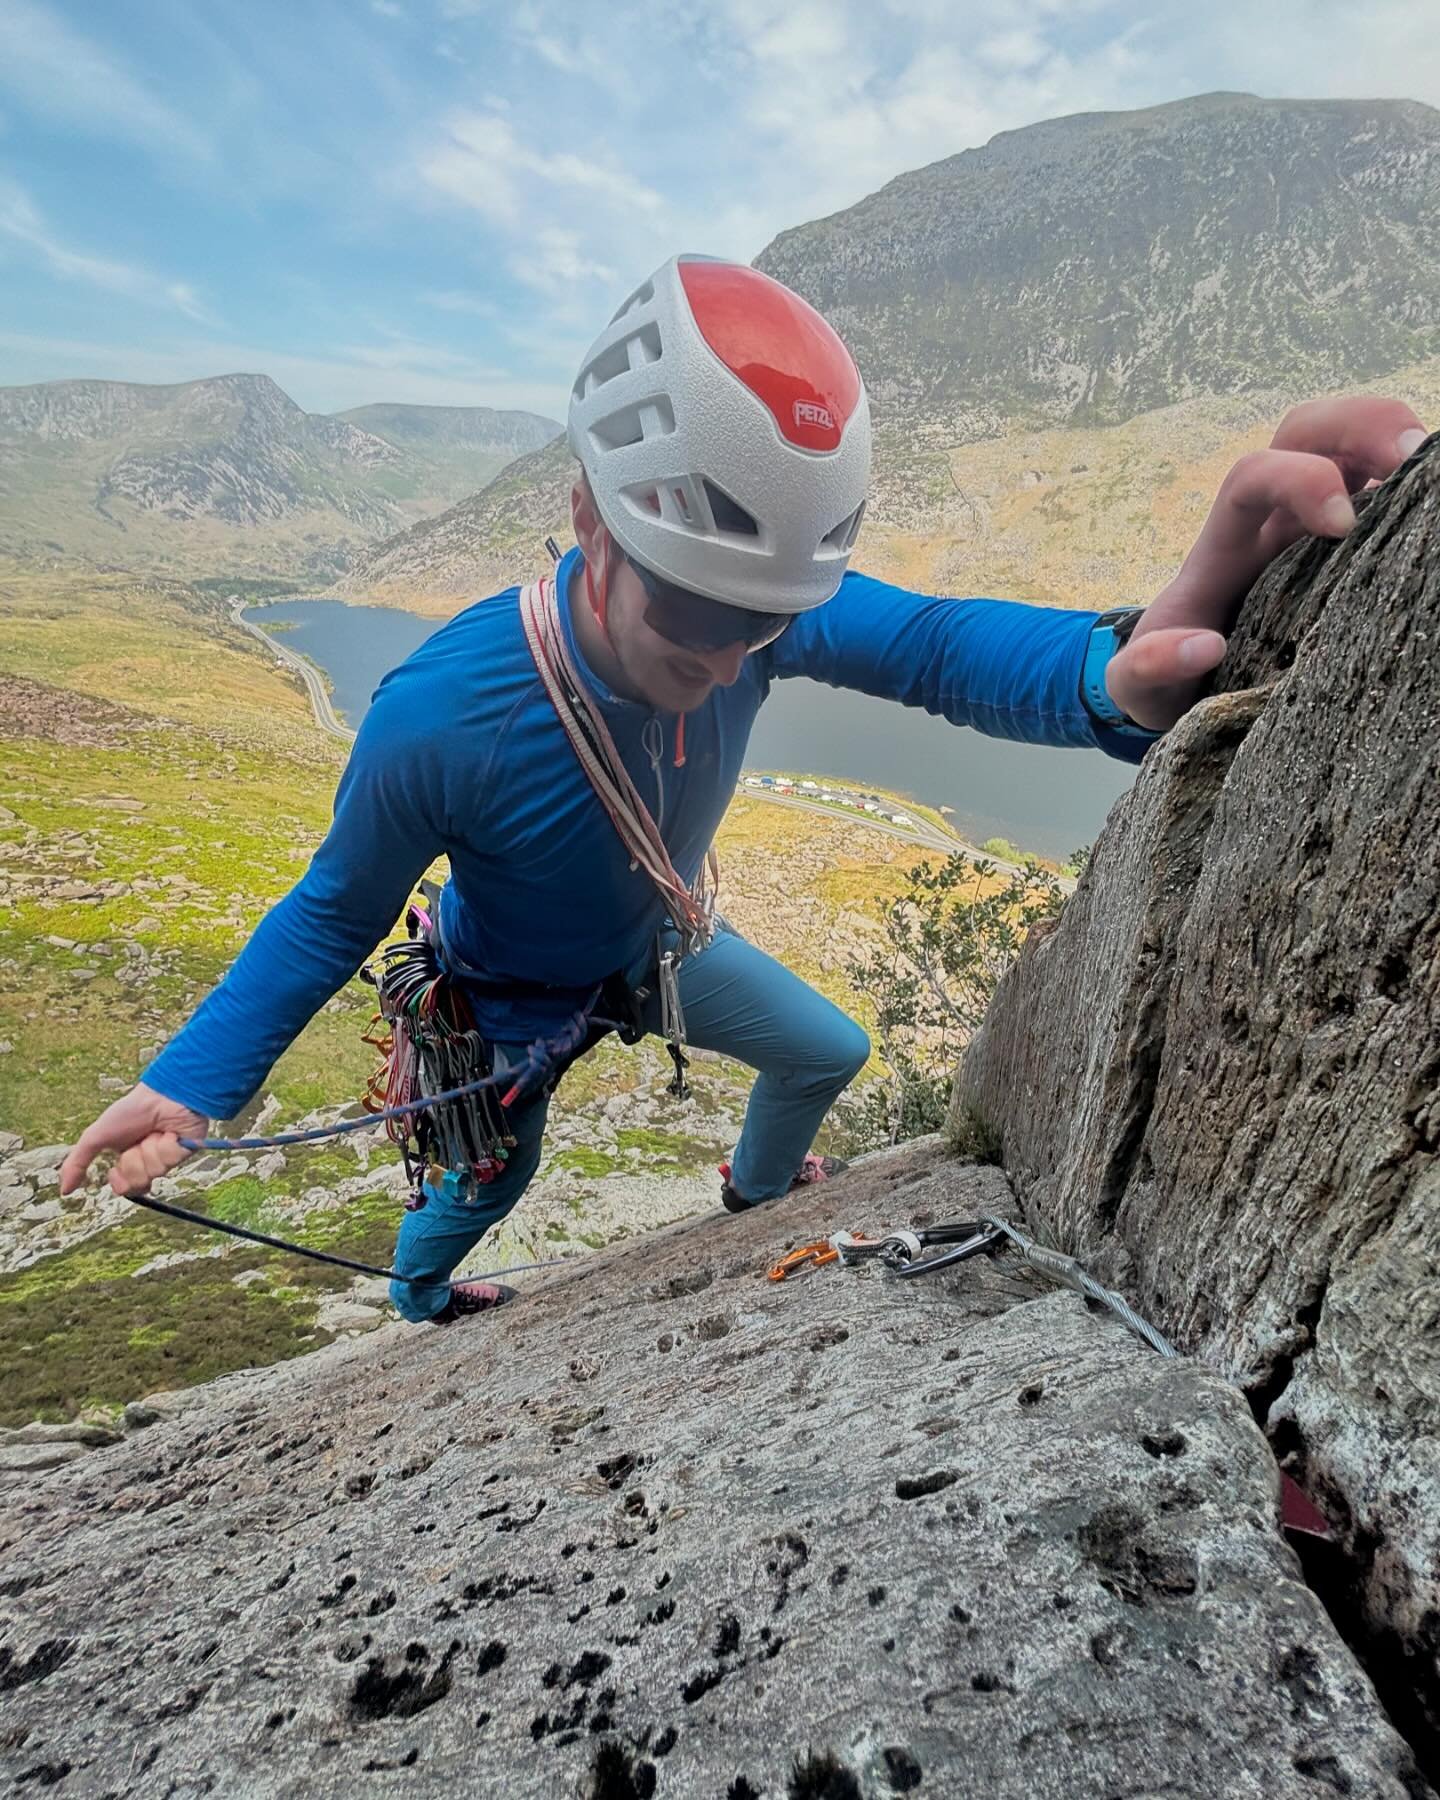 Multipitch development with Danny and Chris this weekend covering (amongst other things) stance management, bombproof belays, tidy ropes and efficient abseiling, all with the aim of getting them out climbing bigger things confidently, safely and effi